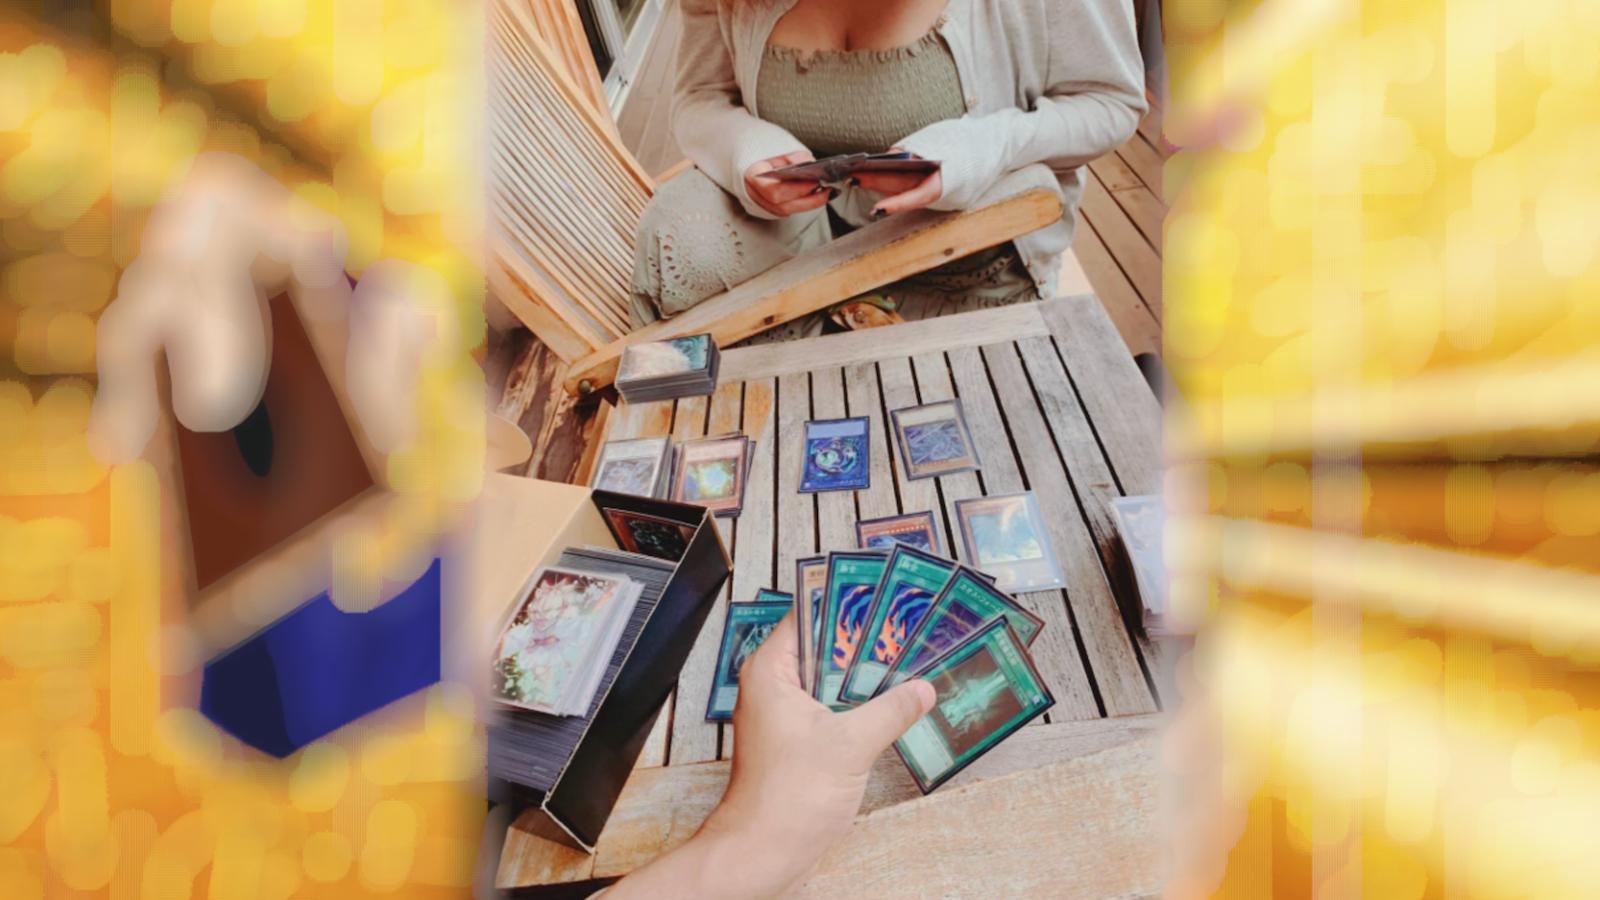 Yu-Gi-Oh! player dueling against a woman